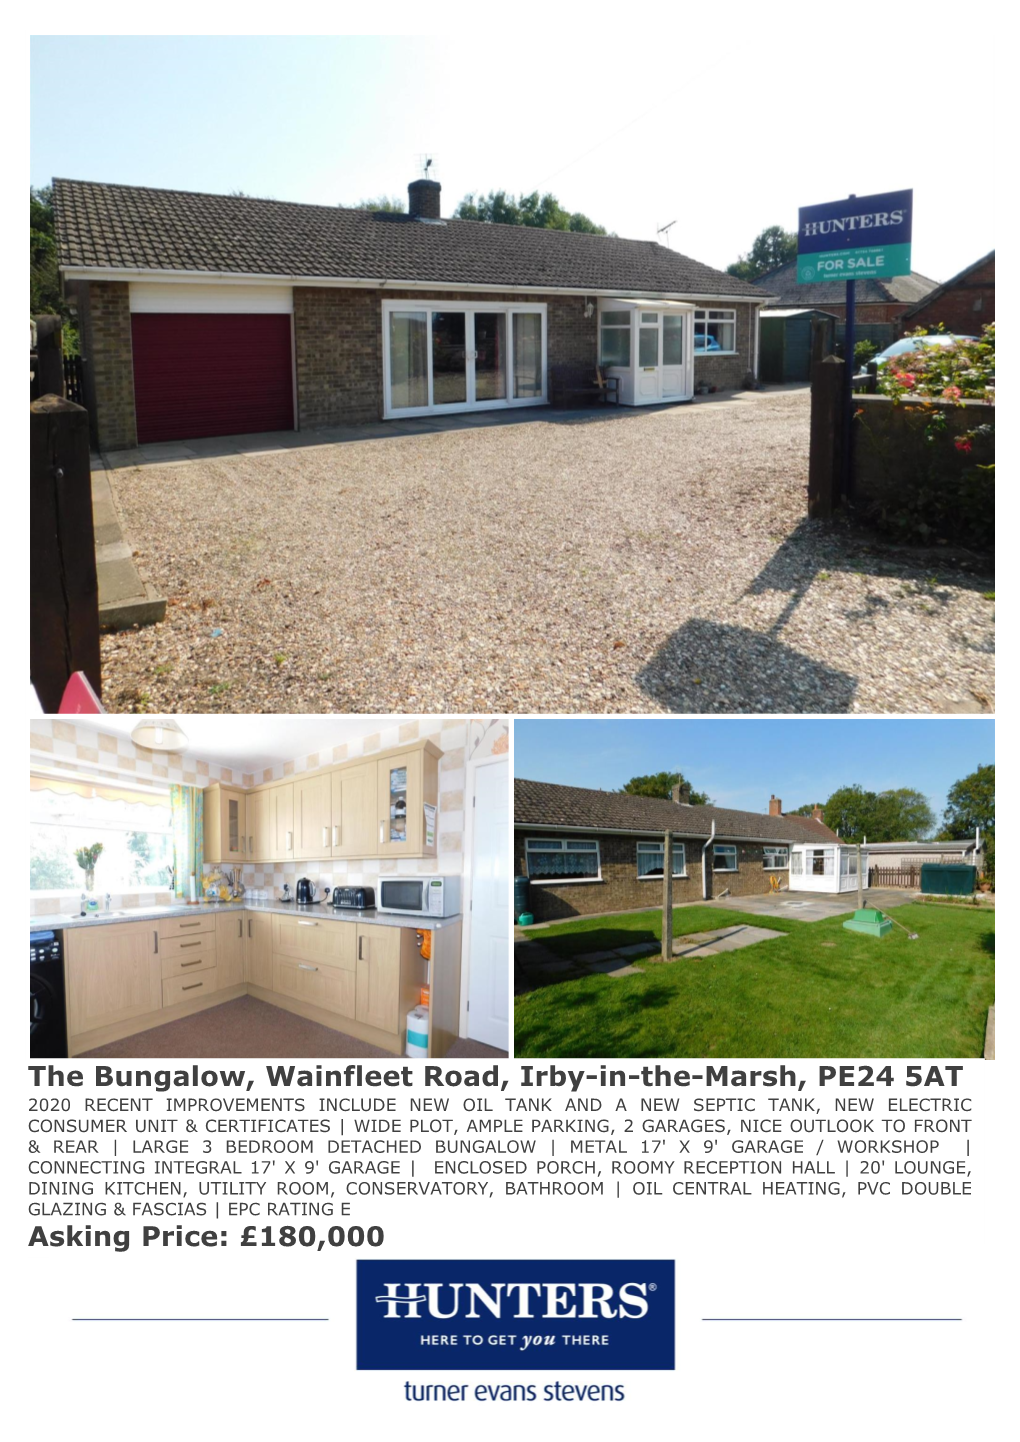 The Bungalow, Wainfleet Road, Irby-In-The-Marsh, PE24 5AT Asking